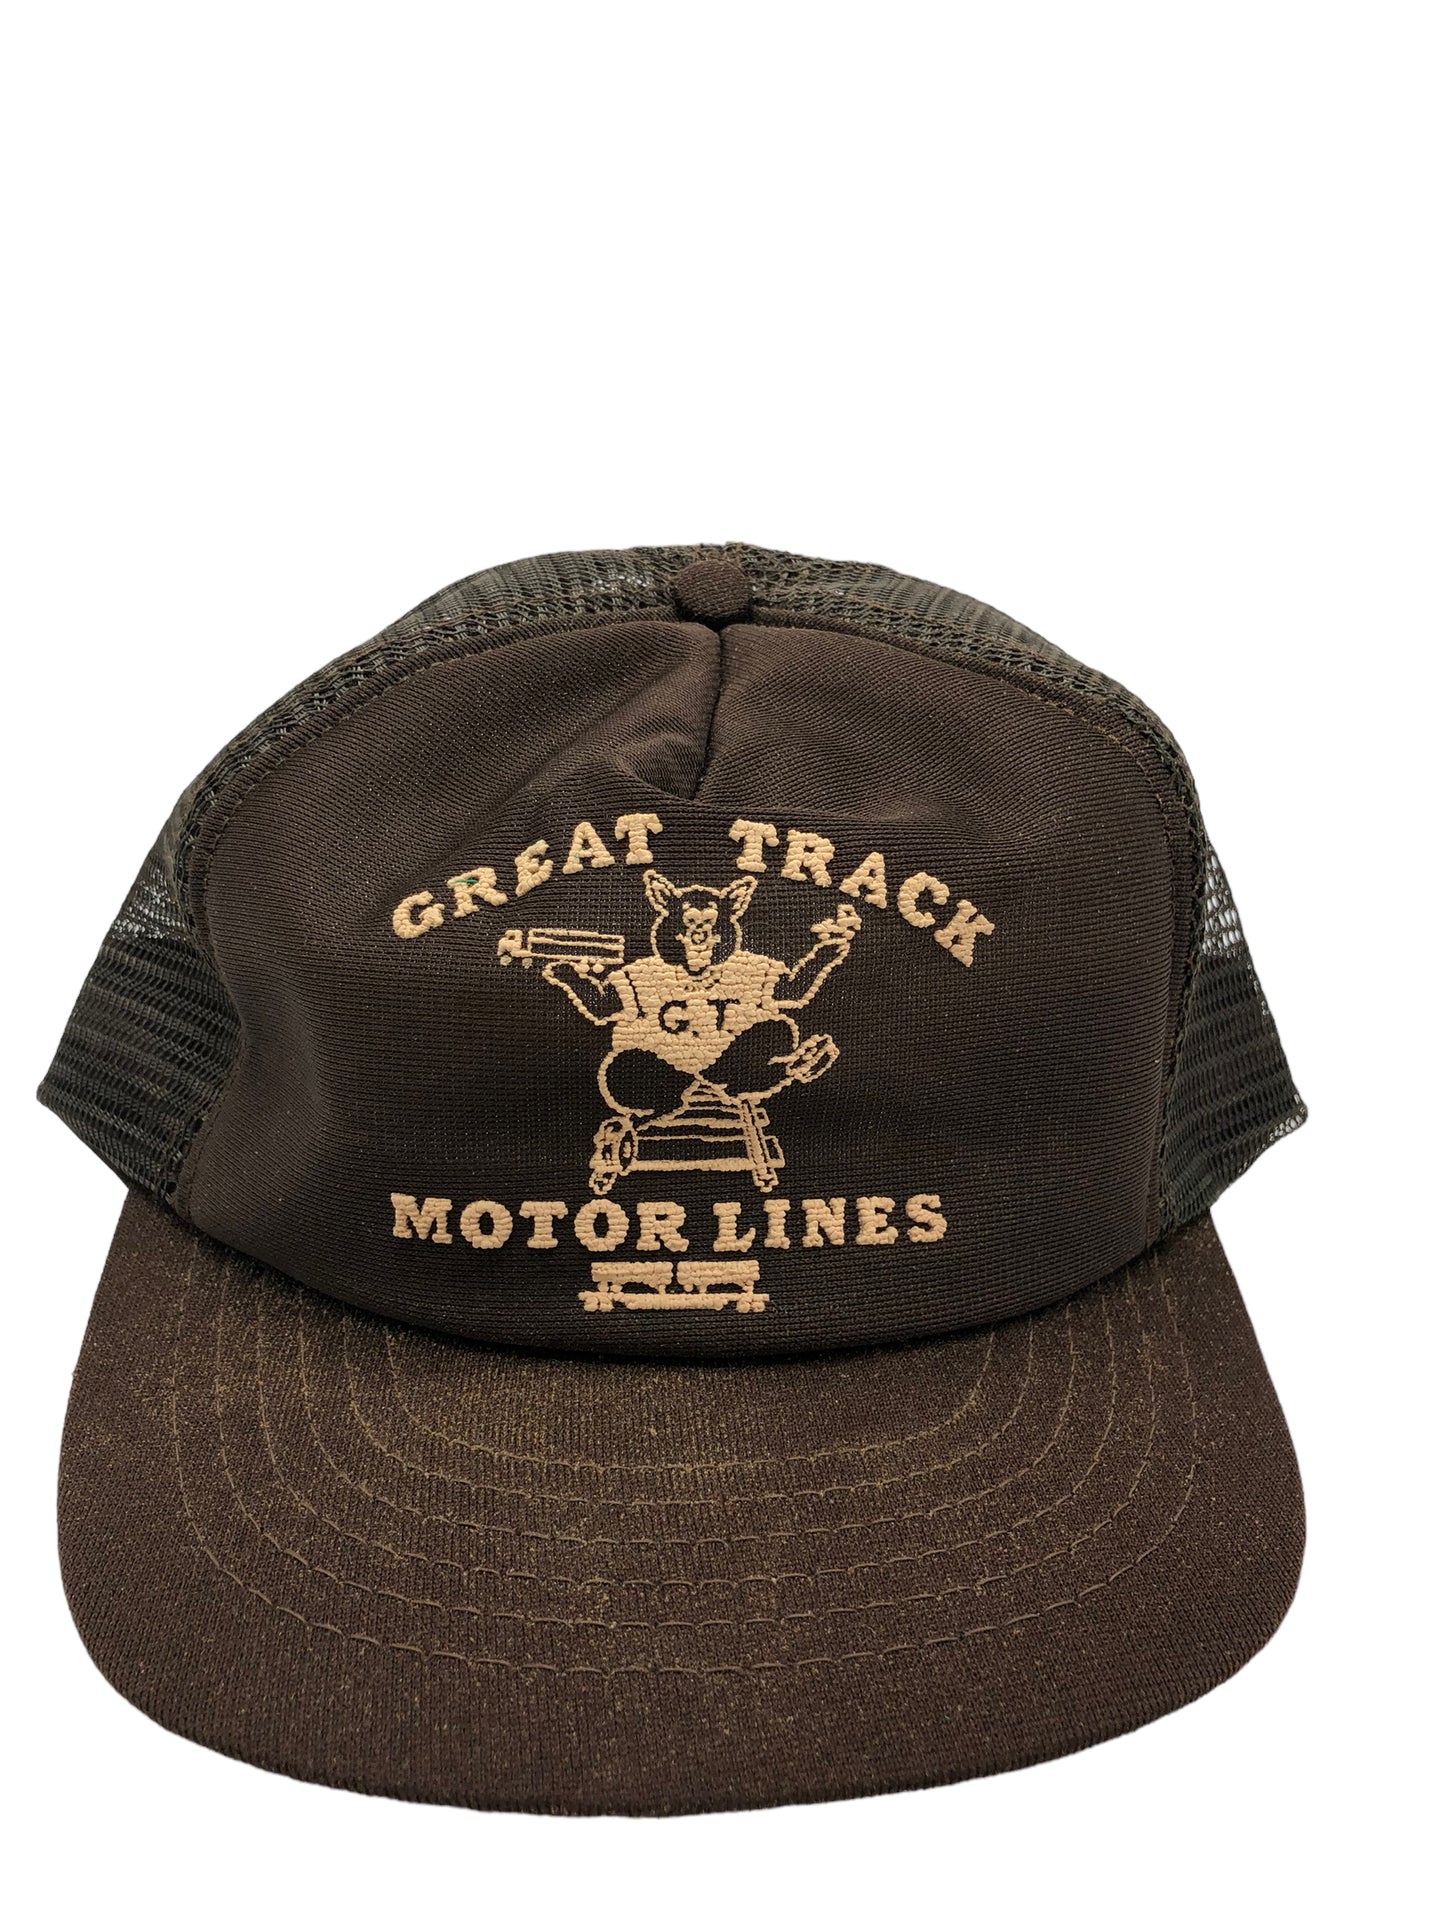 Load image into Gallery viewer, VTG Great Track Motor Lines Trucker Hat
